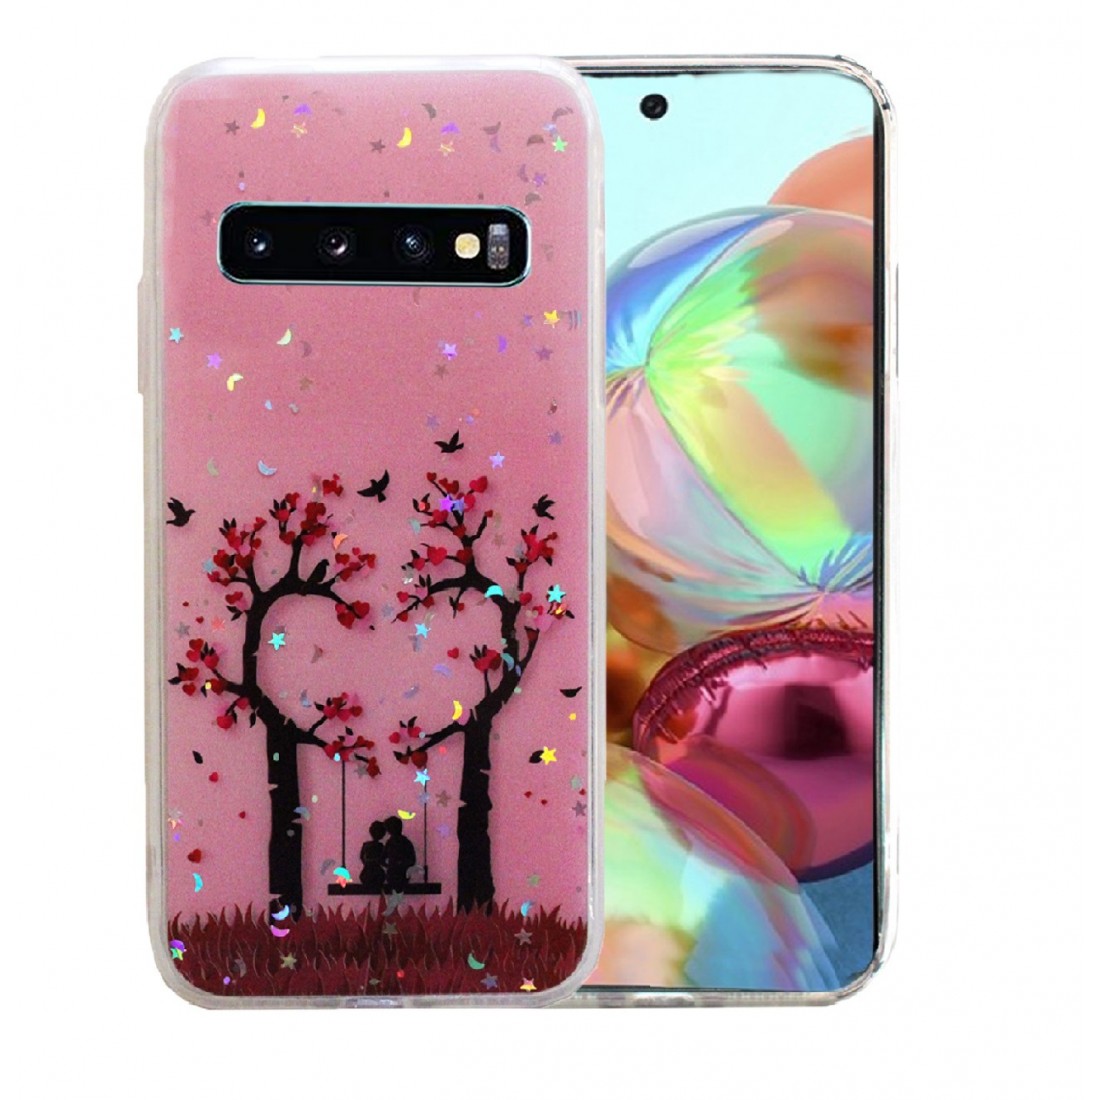 Samsung S10 Plus Official Case, Silicone Phone Case